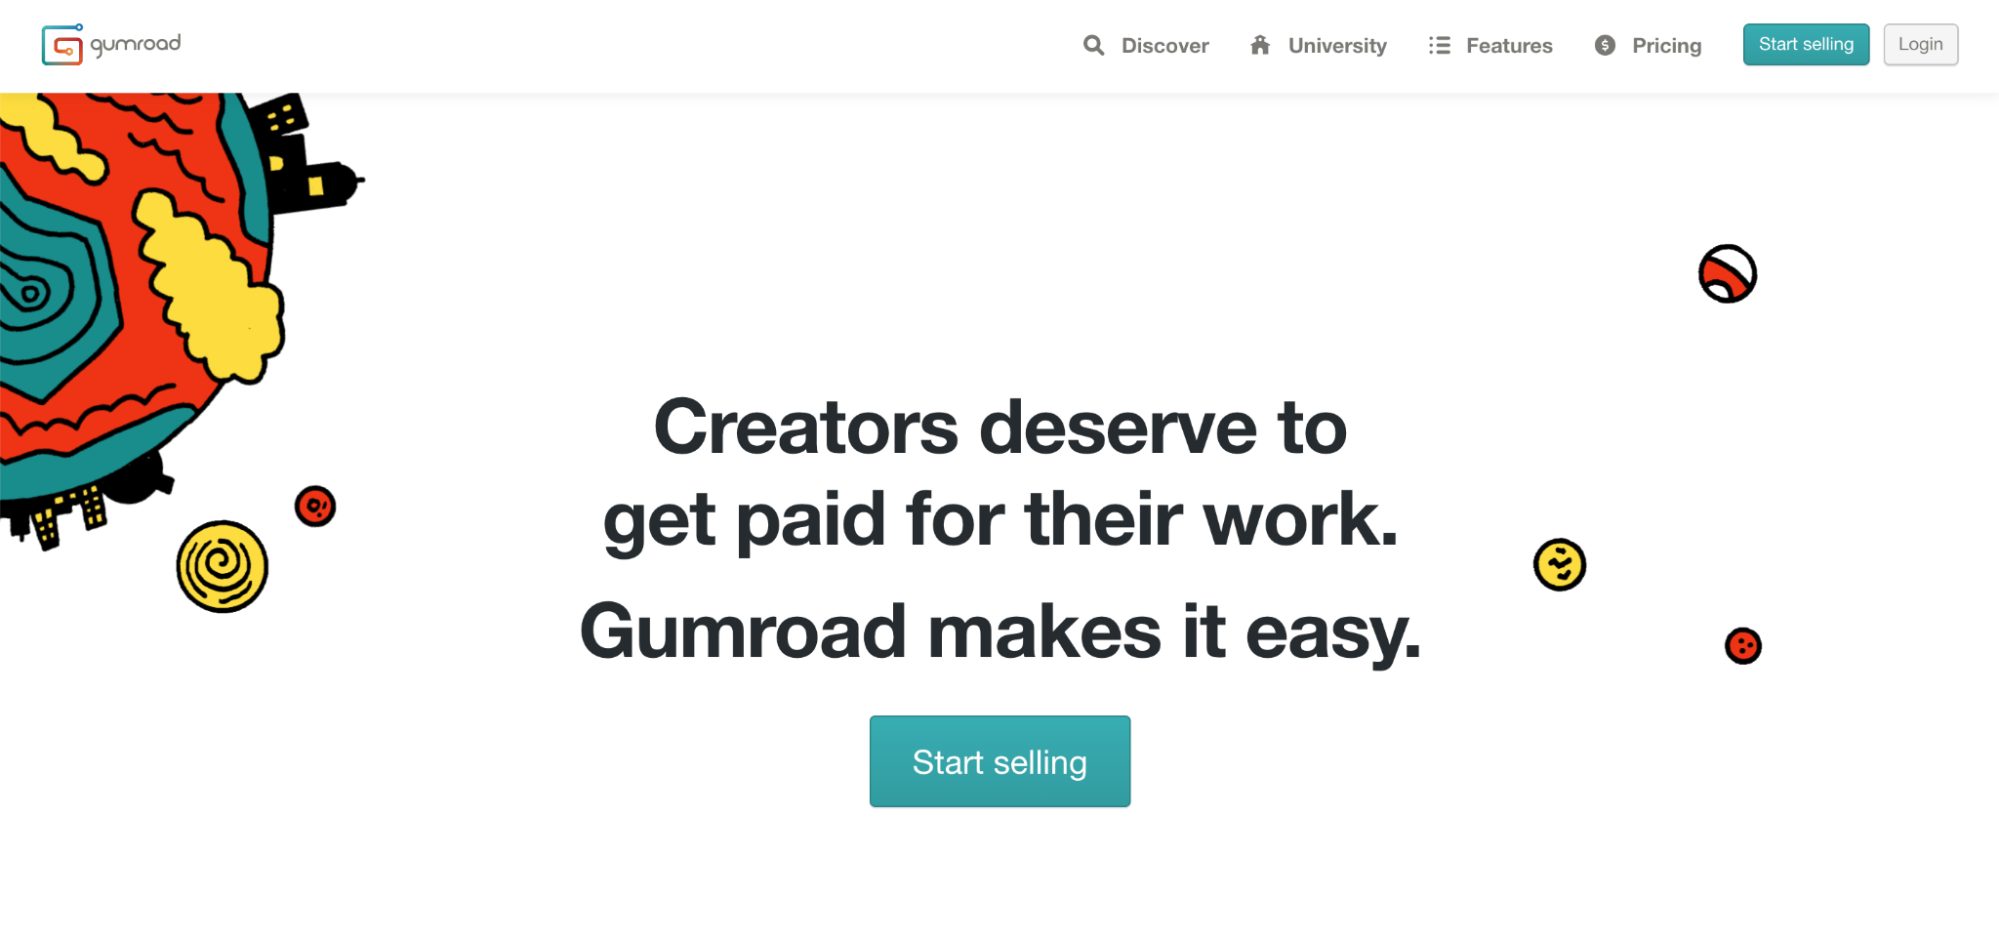 Gumroads home page and brand message